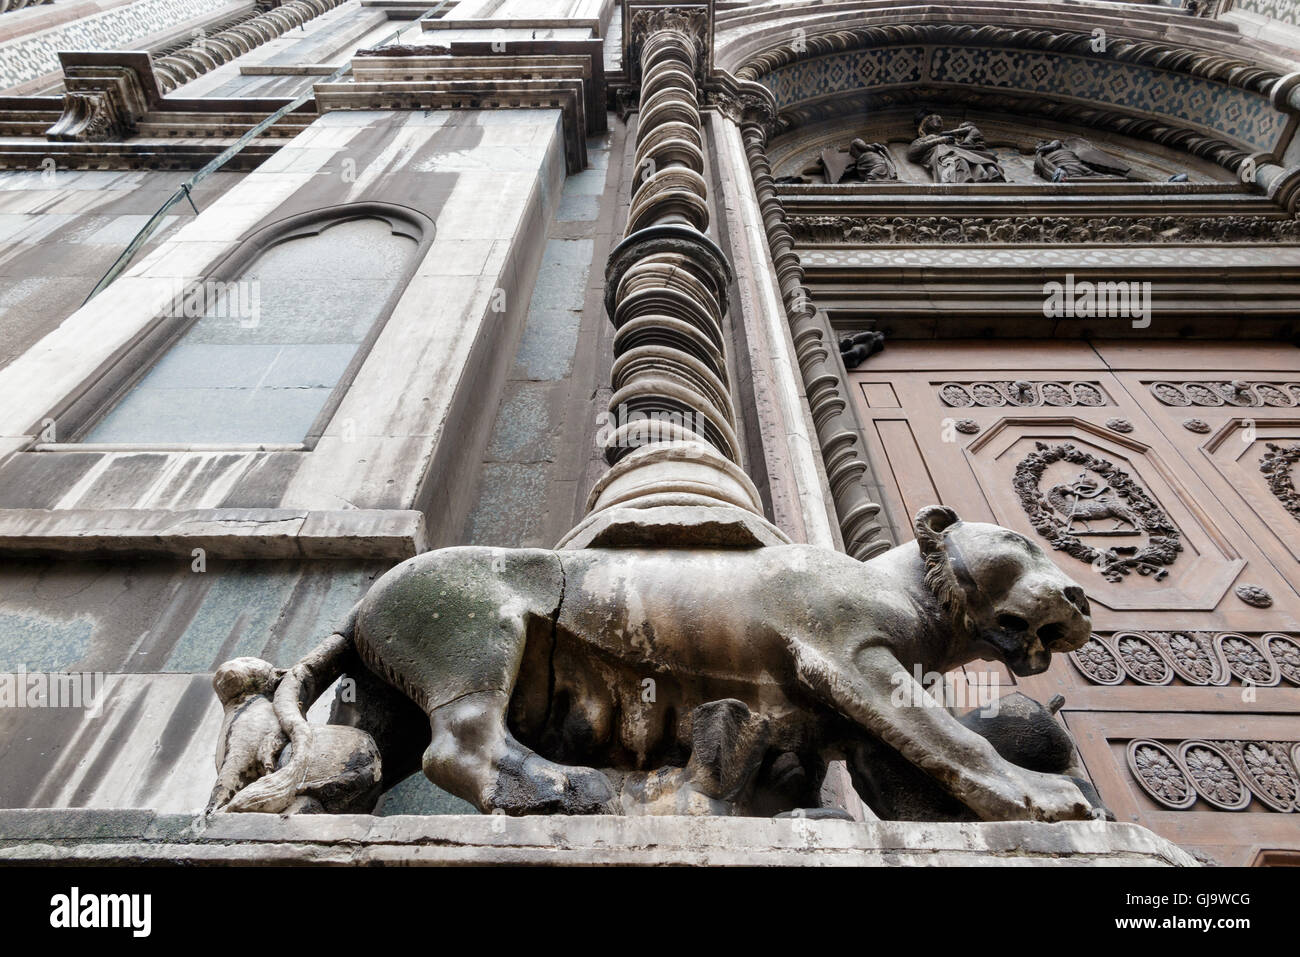 Lioness statue on the facade of the Duomo in Flrence, Italy Stock Photo